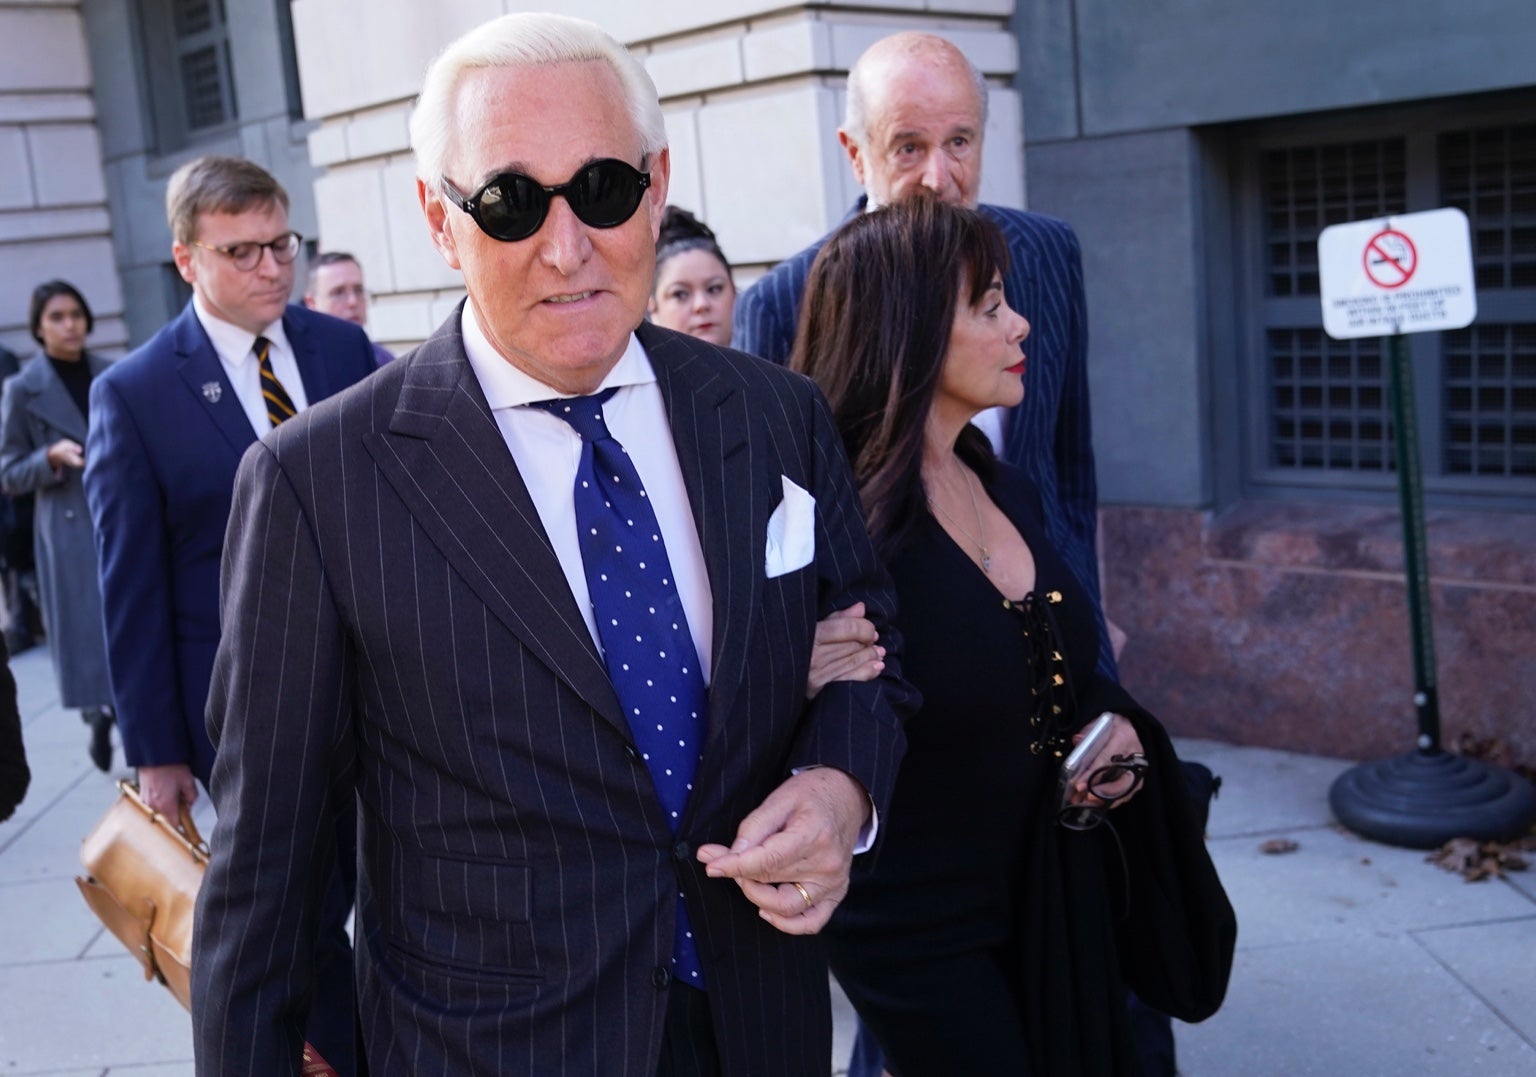 Roger Stone appealed to the president to pardon him after being found guilty last year